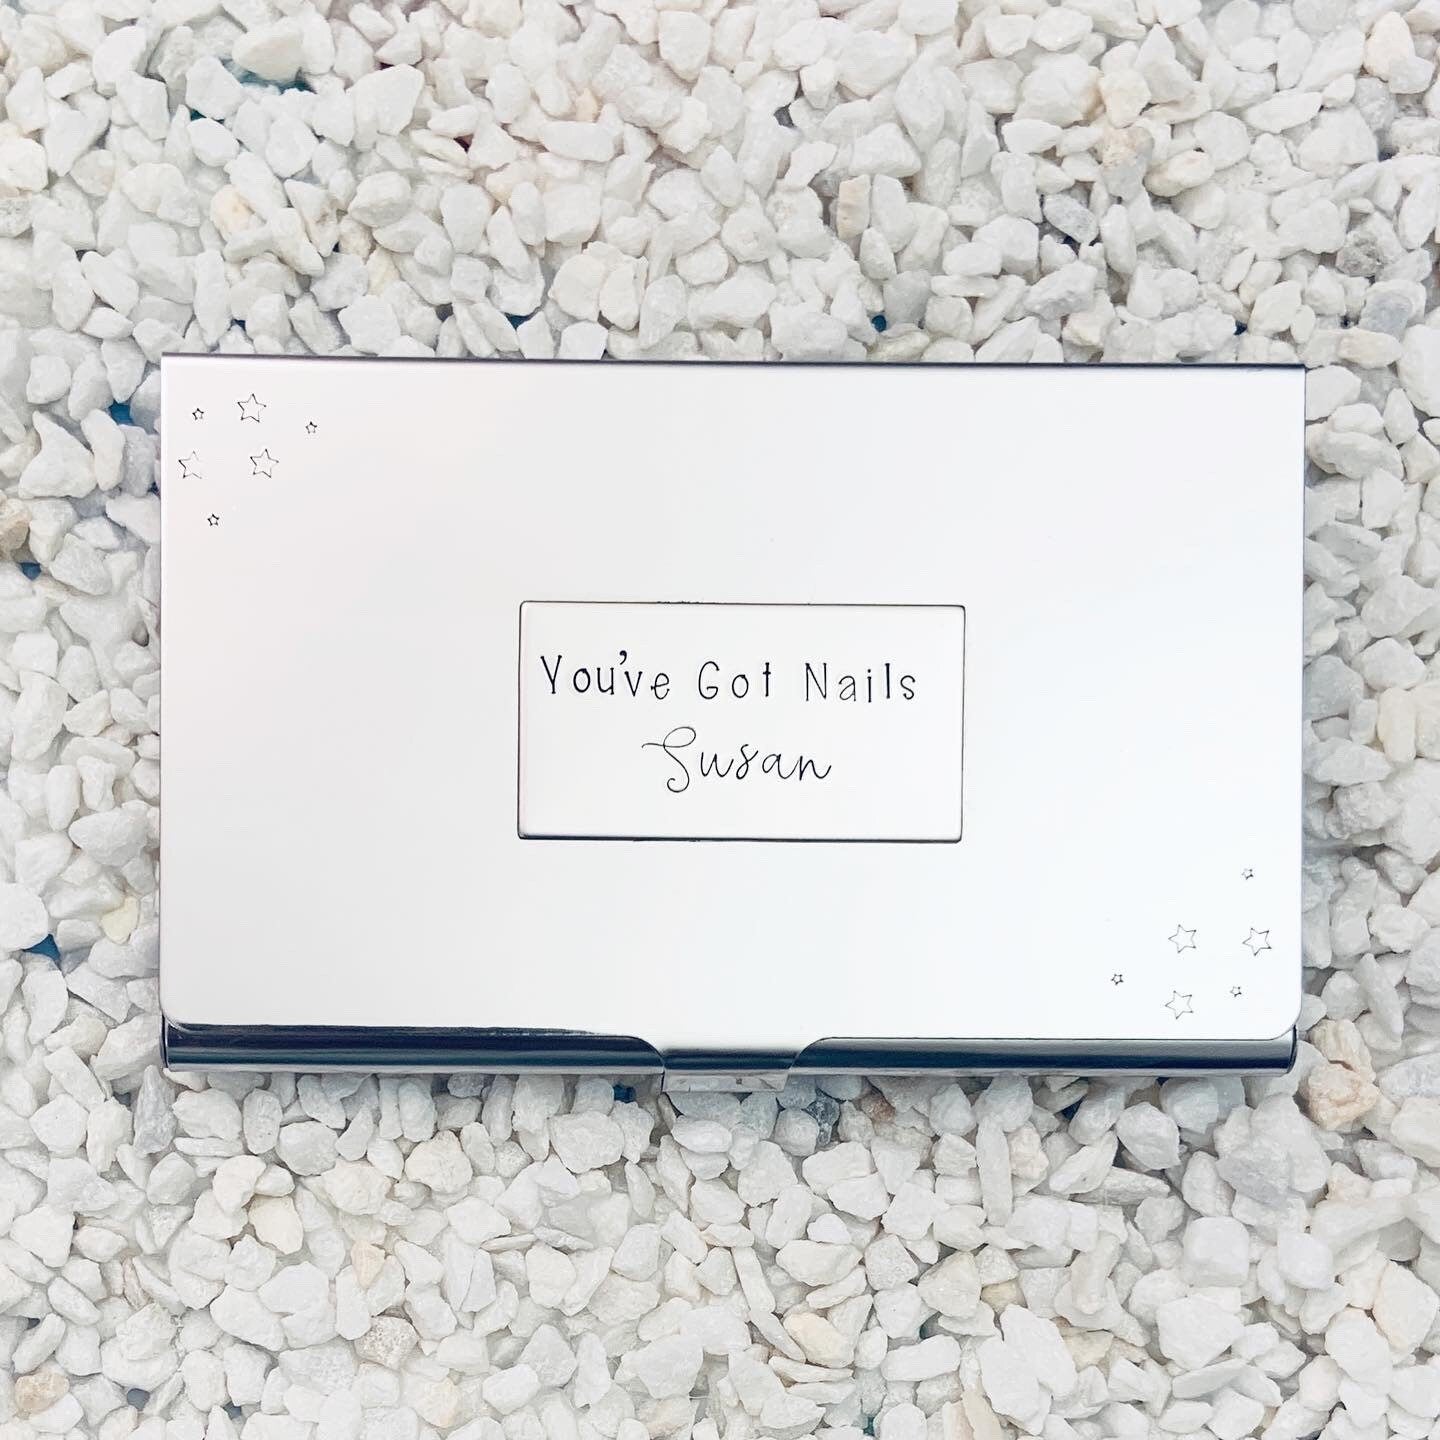 Custom/Personalized Business Card Holder